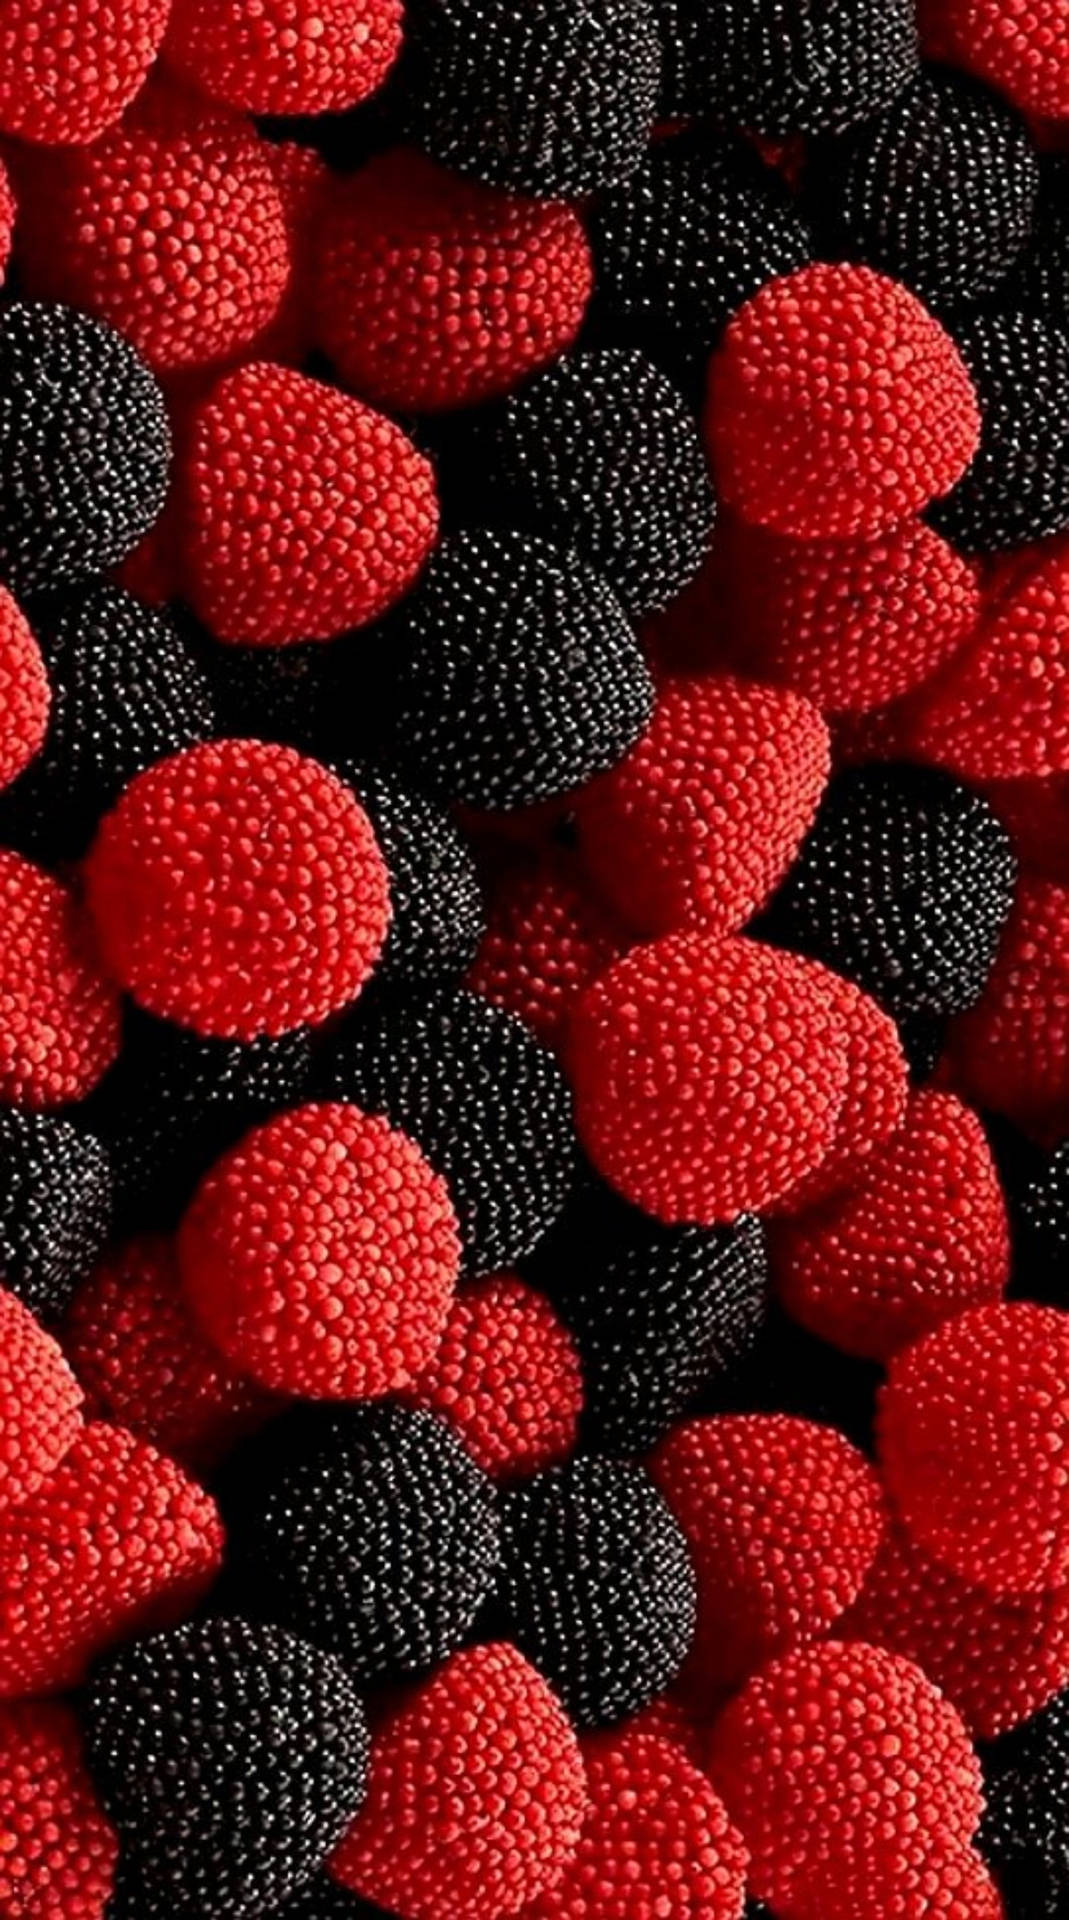 Black And Red Berries Samsung Full Hd Background